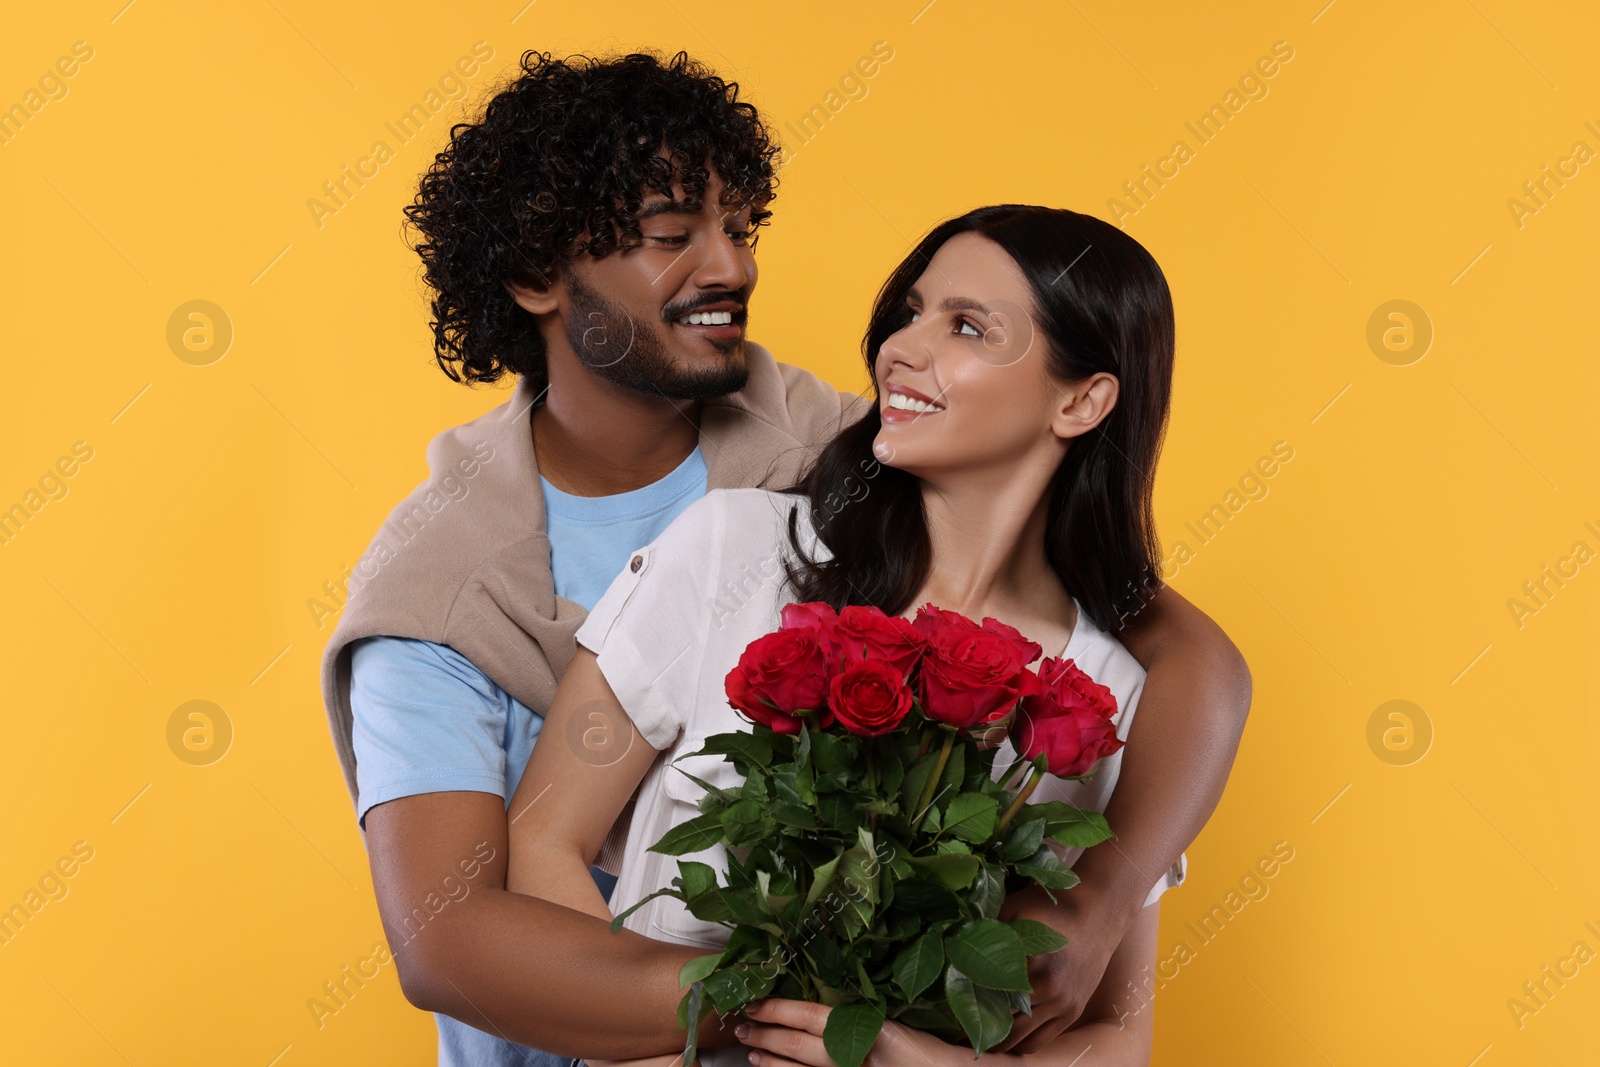 Photo of International dating. Happy couple with bouquet of roses on yellow background